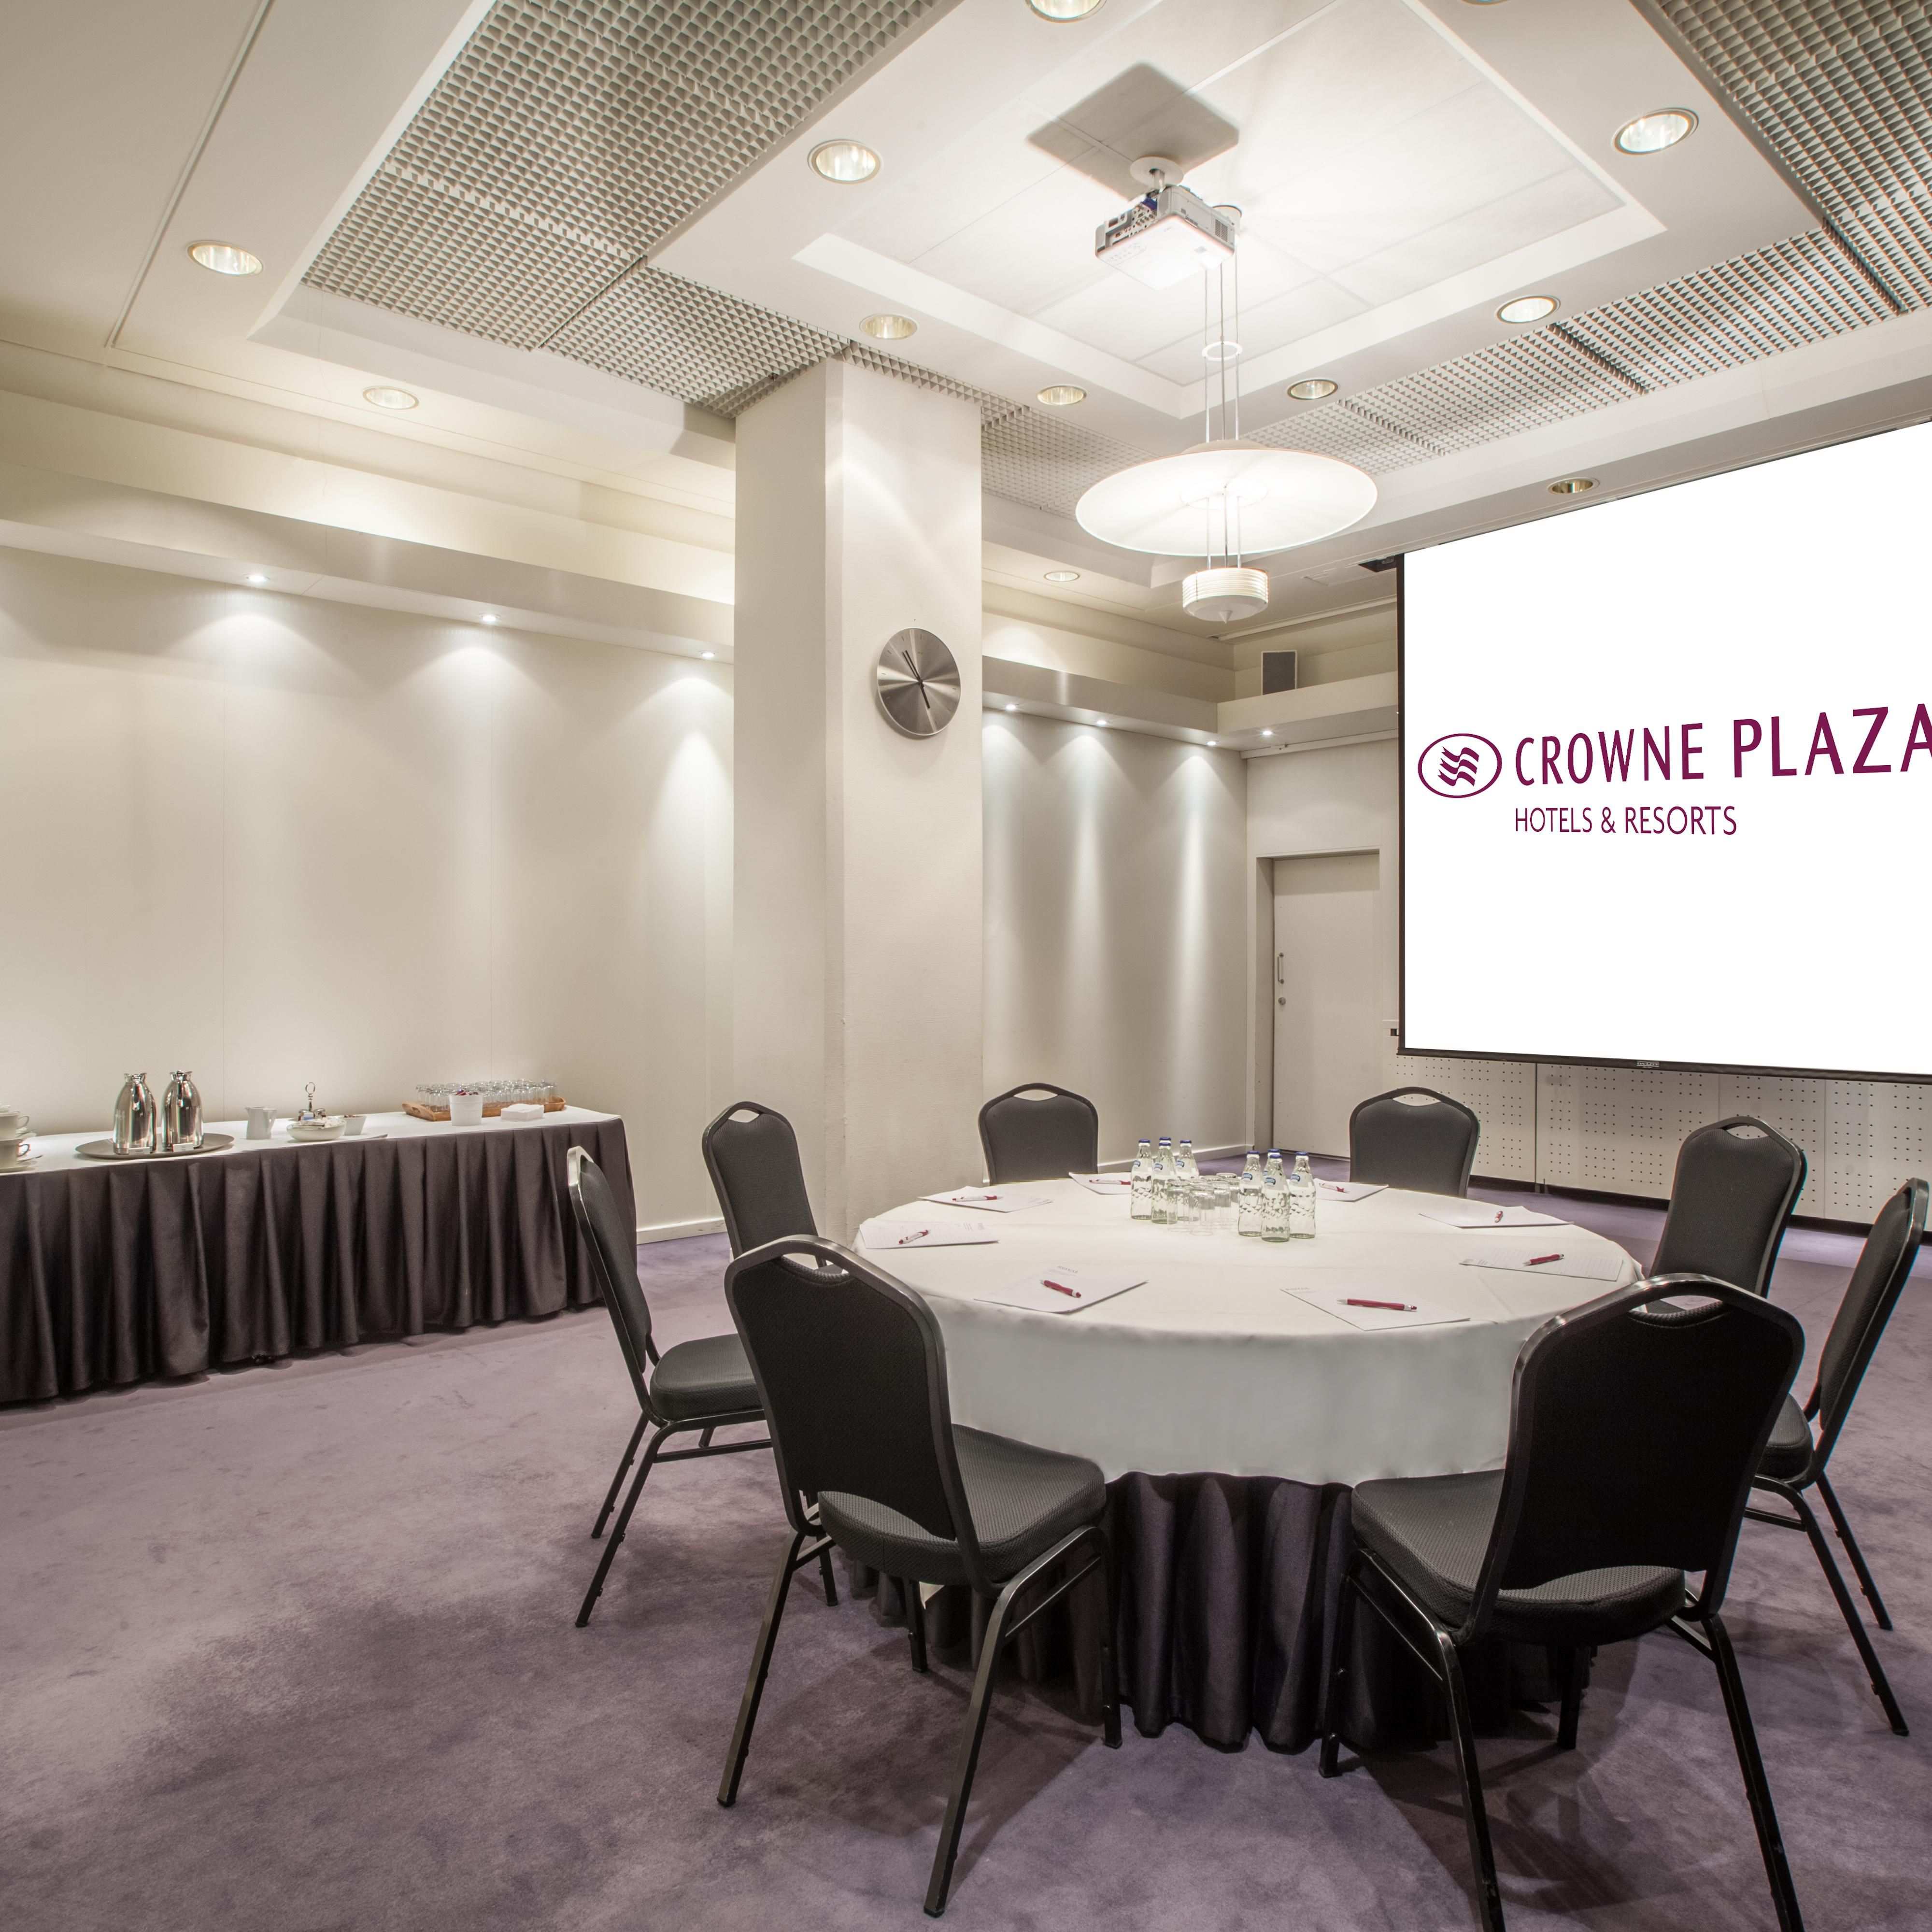 Meeting room 5 at the Crowne Plaza Helsink features 50m2 space